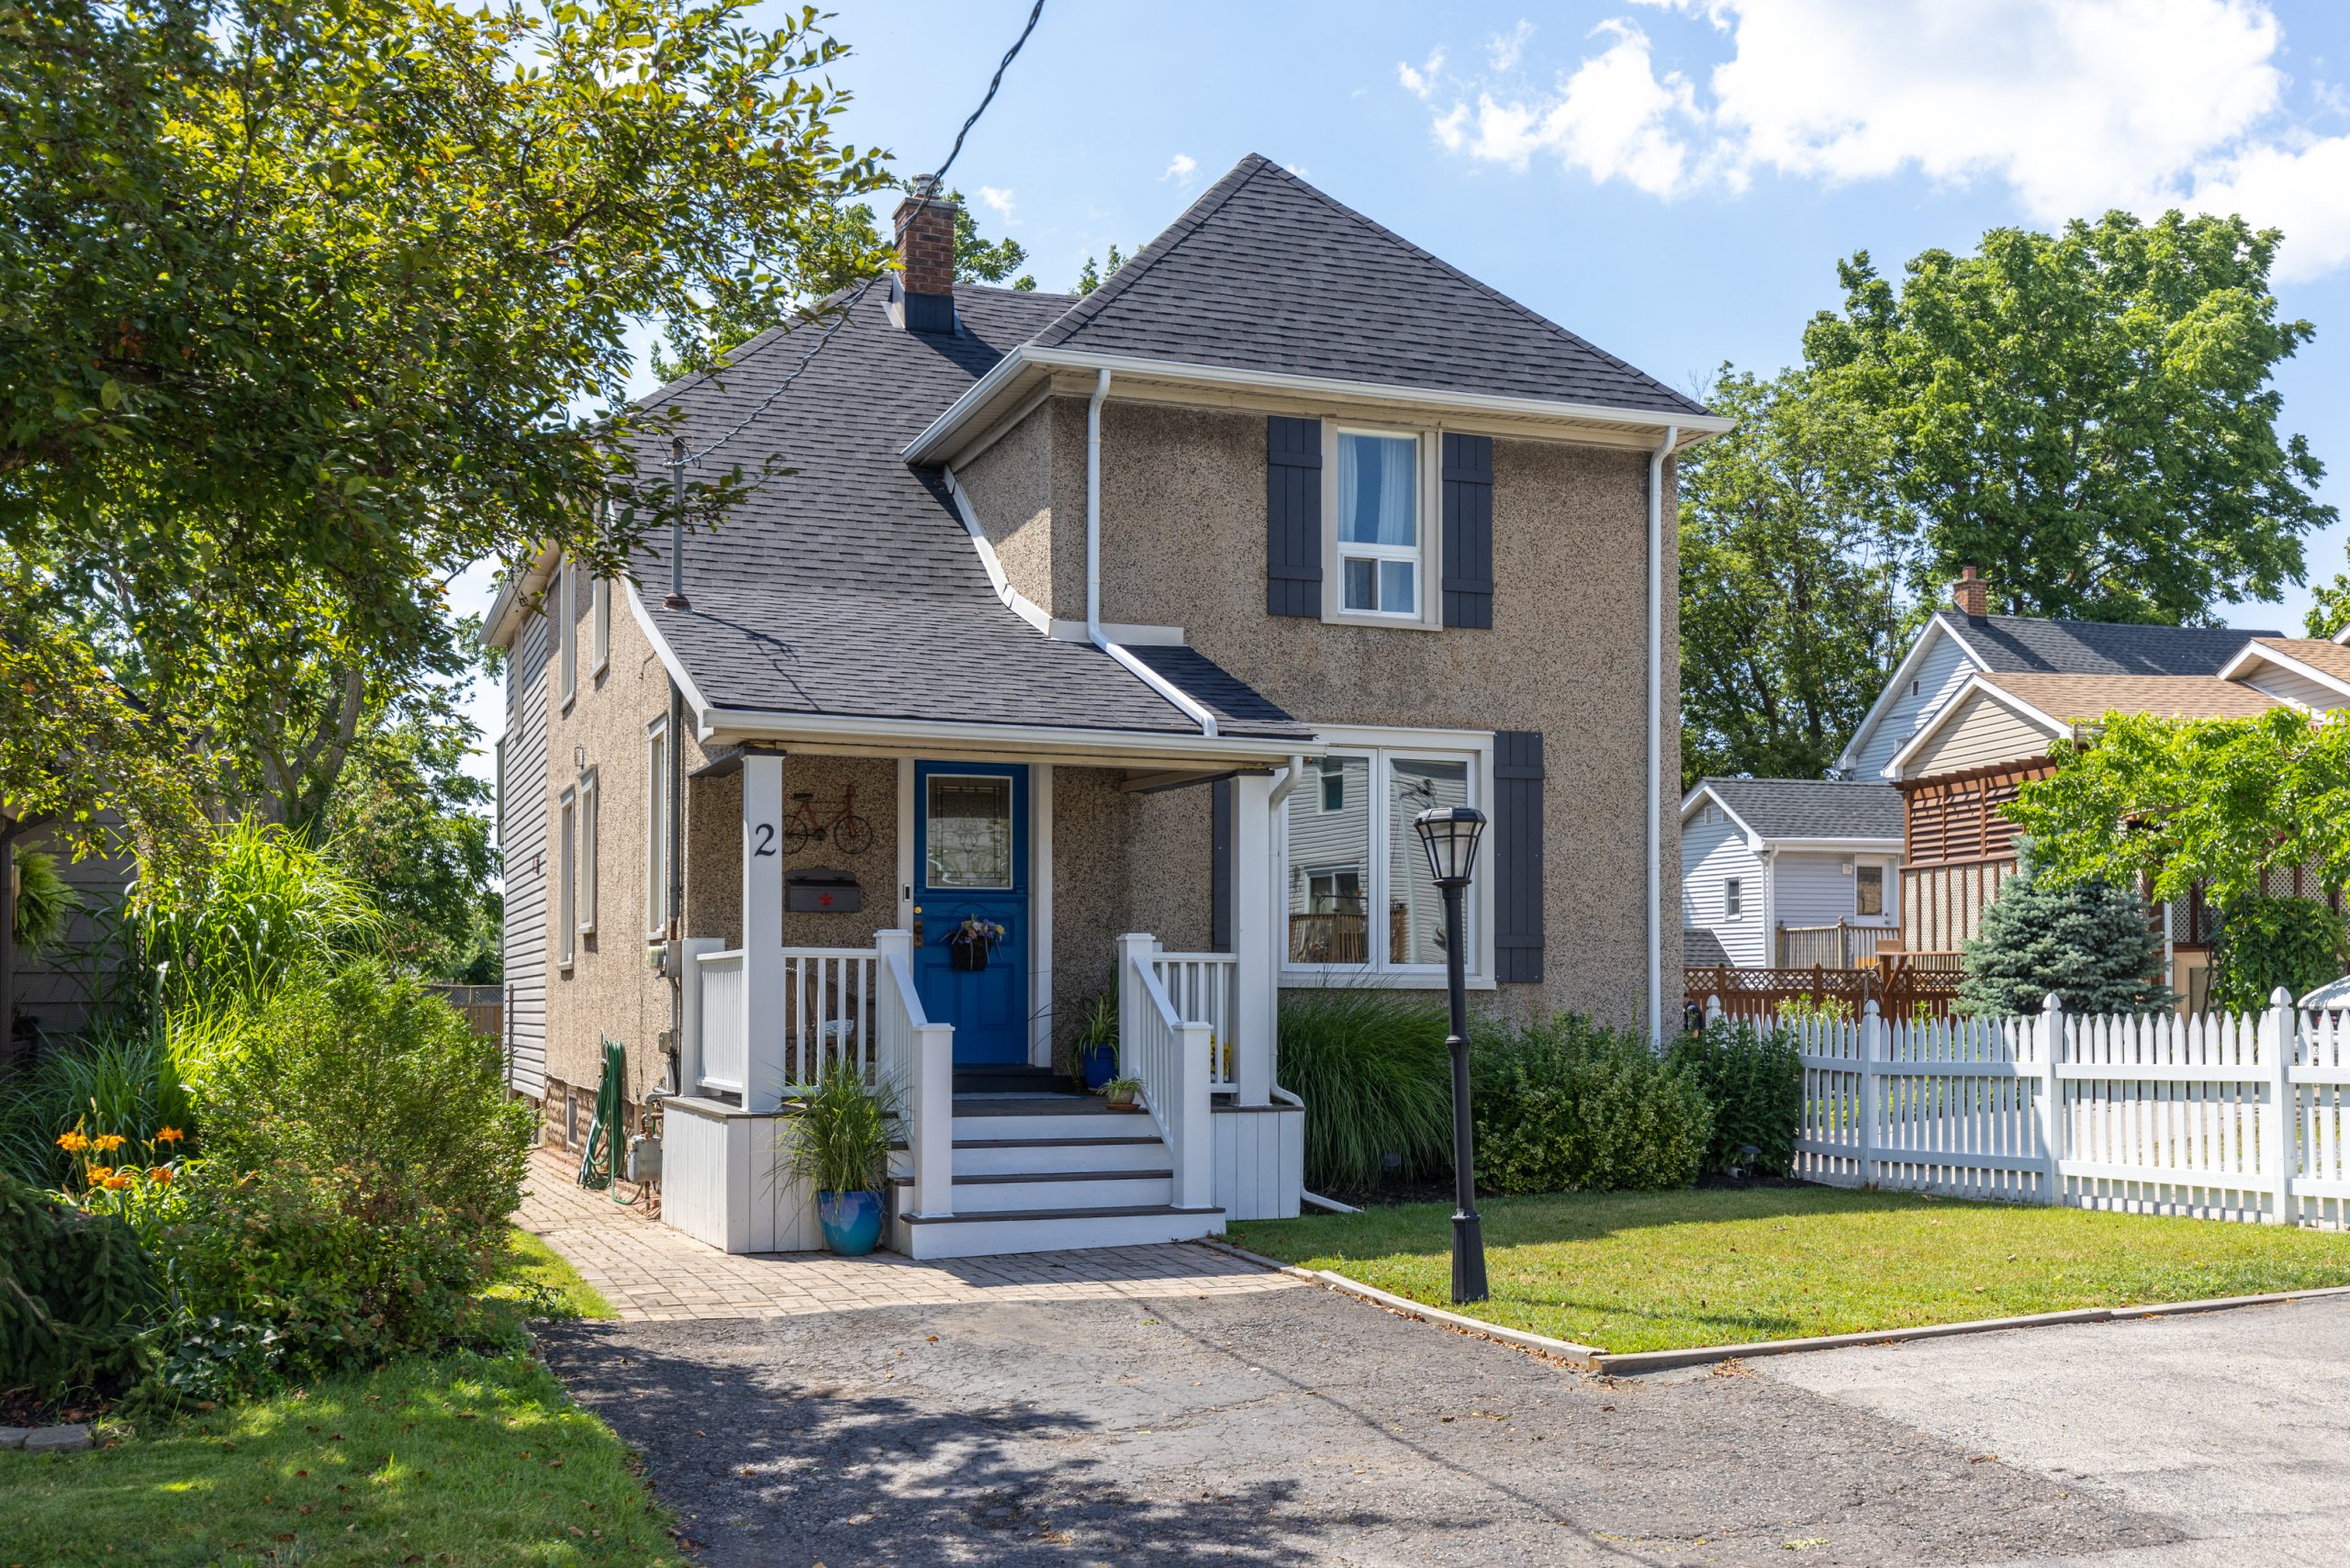 Property image for 2 Ravine Road, St. Catharines